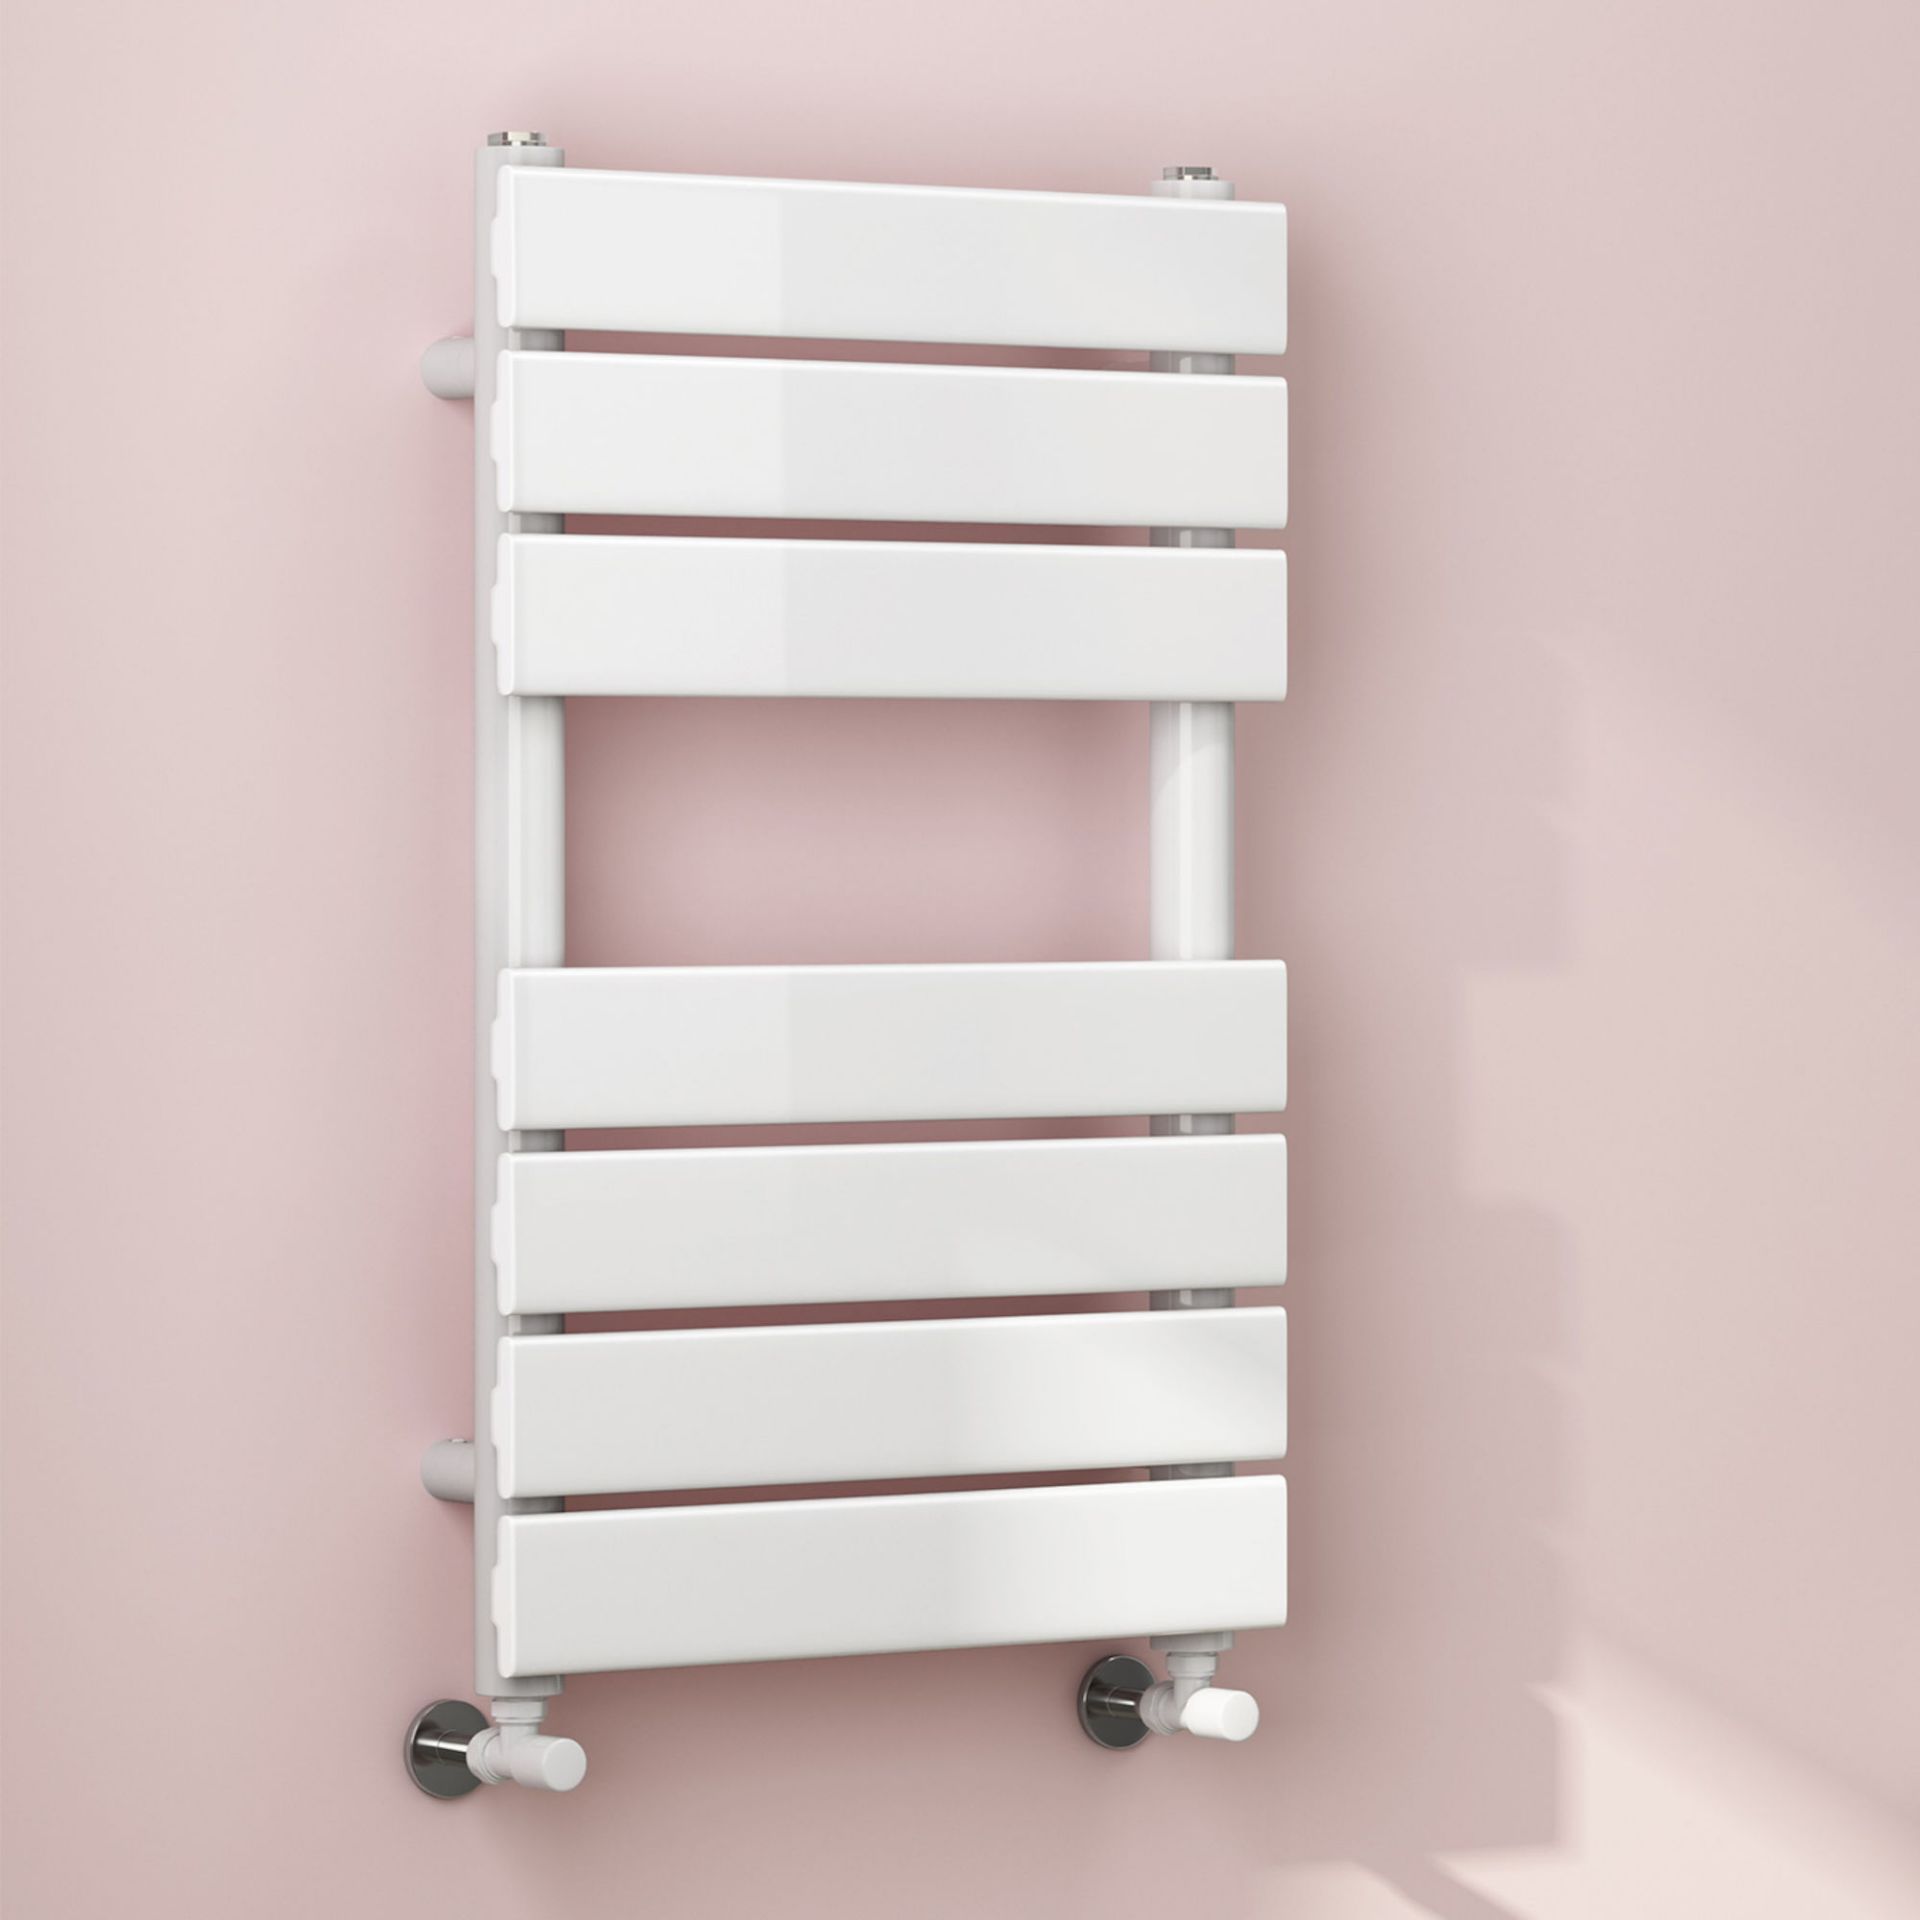 (SP103) 650x400mm White Flat Panel Ladder Towel Radiator. Made from low carbon steel with a high